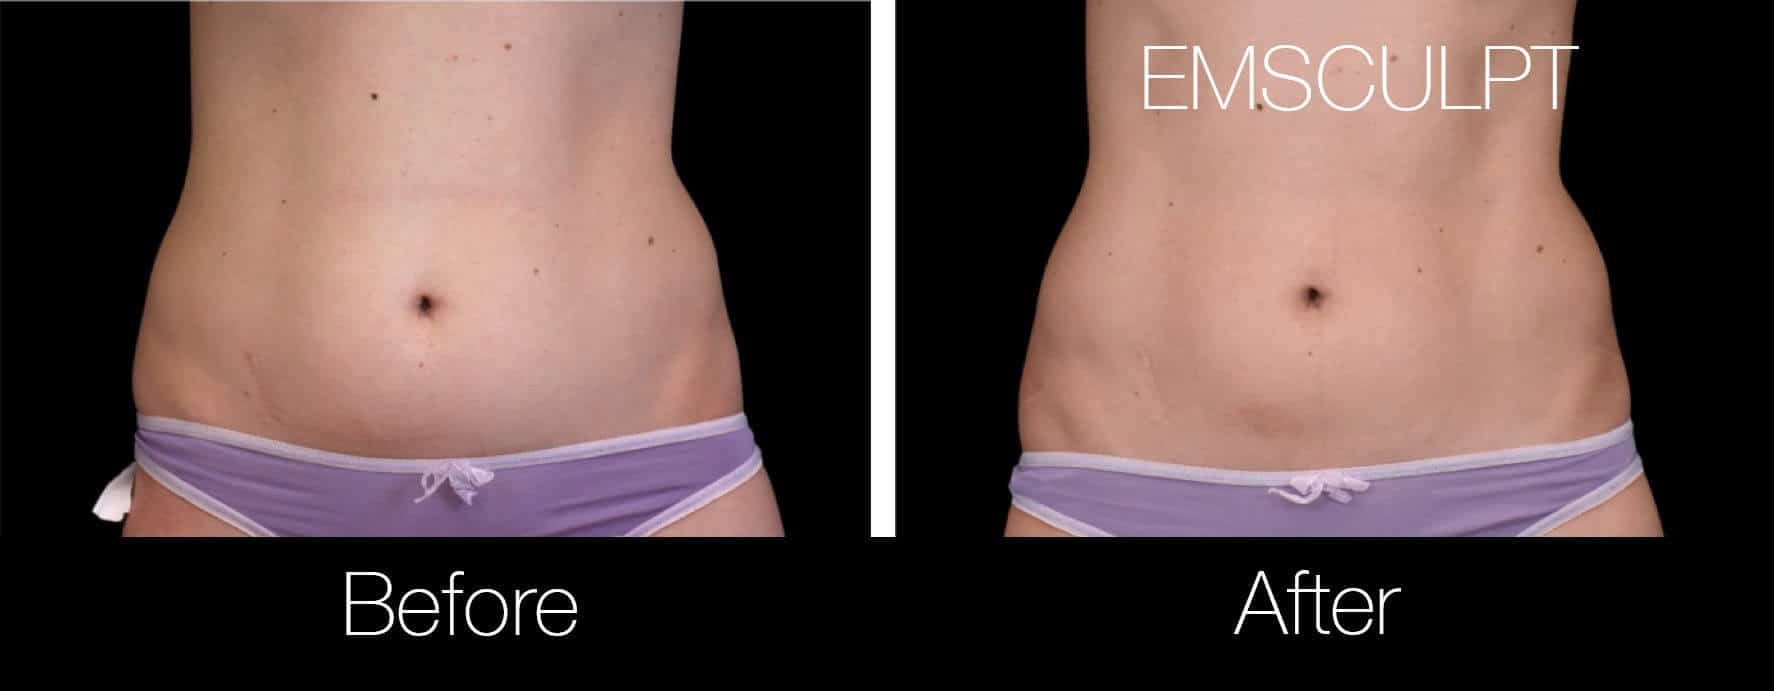 come with me to get non-invasive body contouring at @Ever/Body in